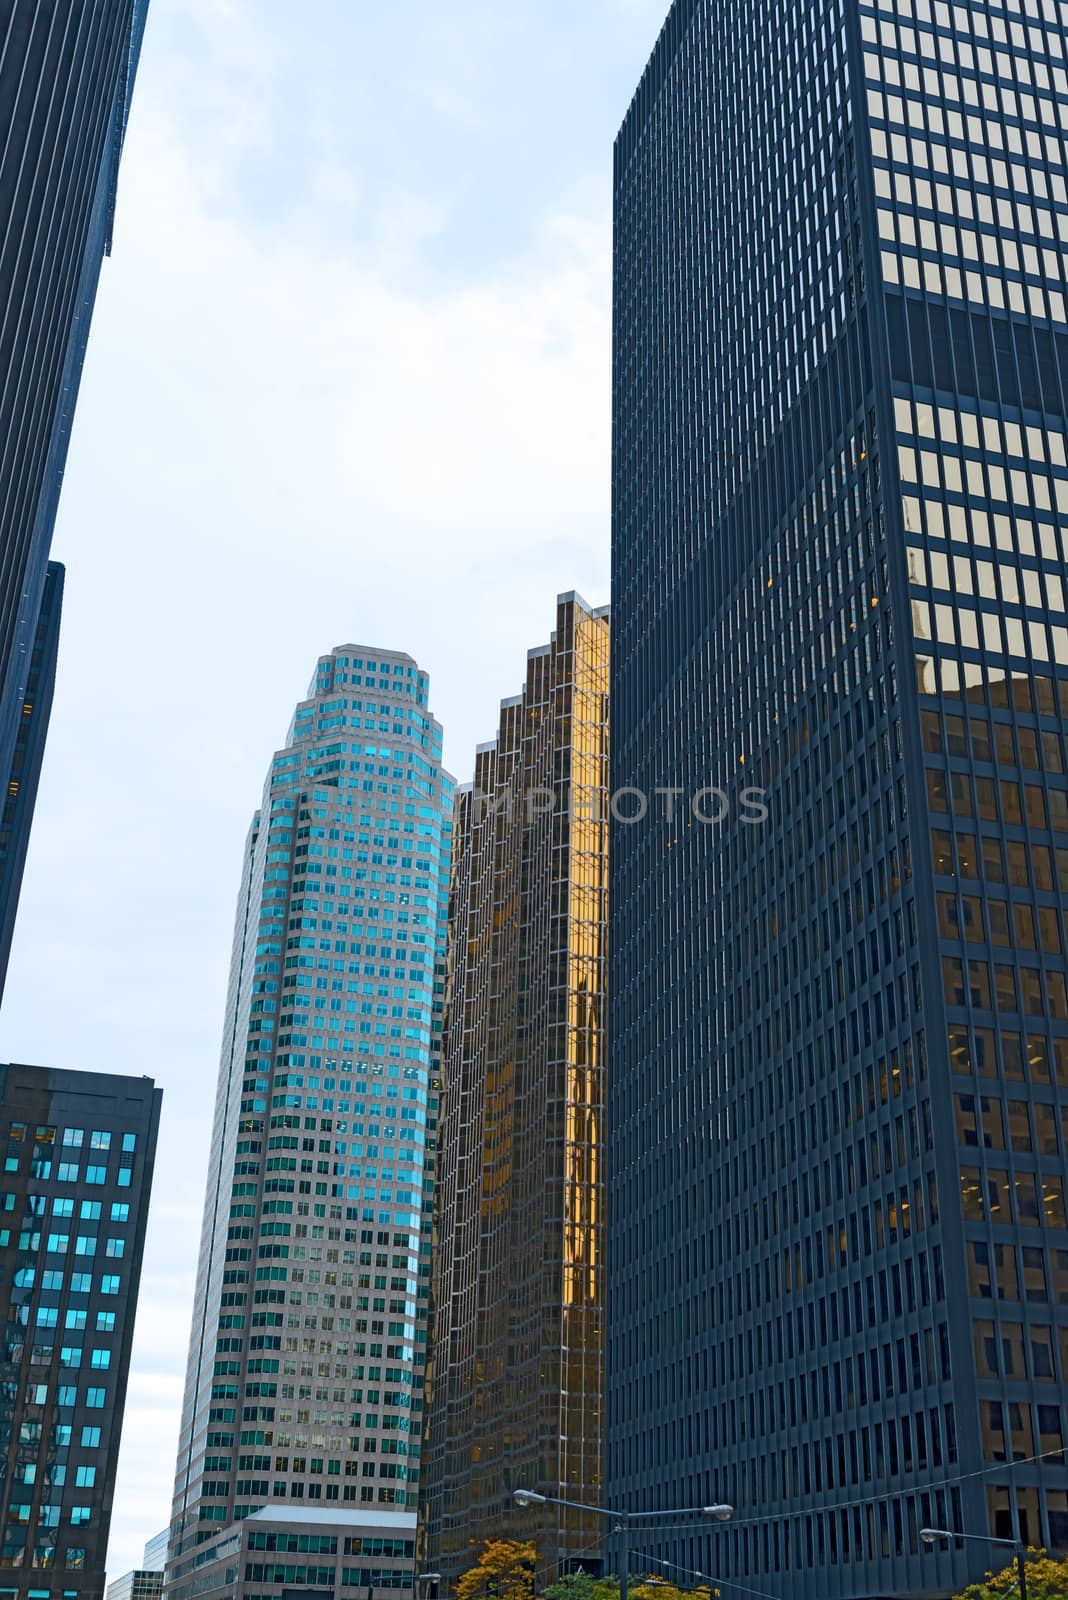 Closeup of skyscrapers in dowtown Toronto, financial district on Bay Street